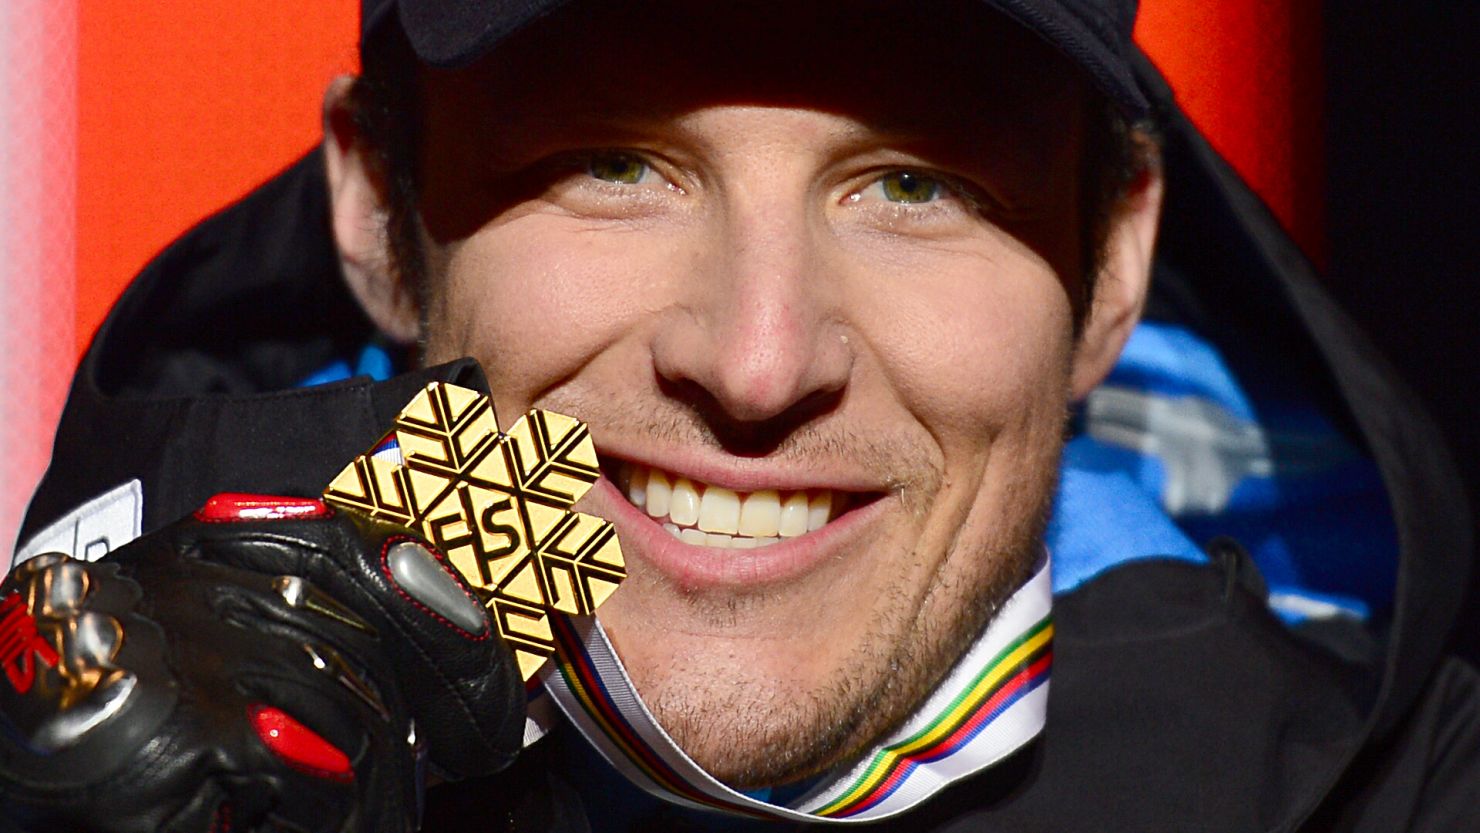 Aksel Lund Svindal is due to defend the downhill world title which he won in Schladming, Austria last year.